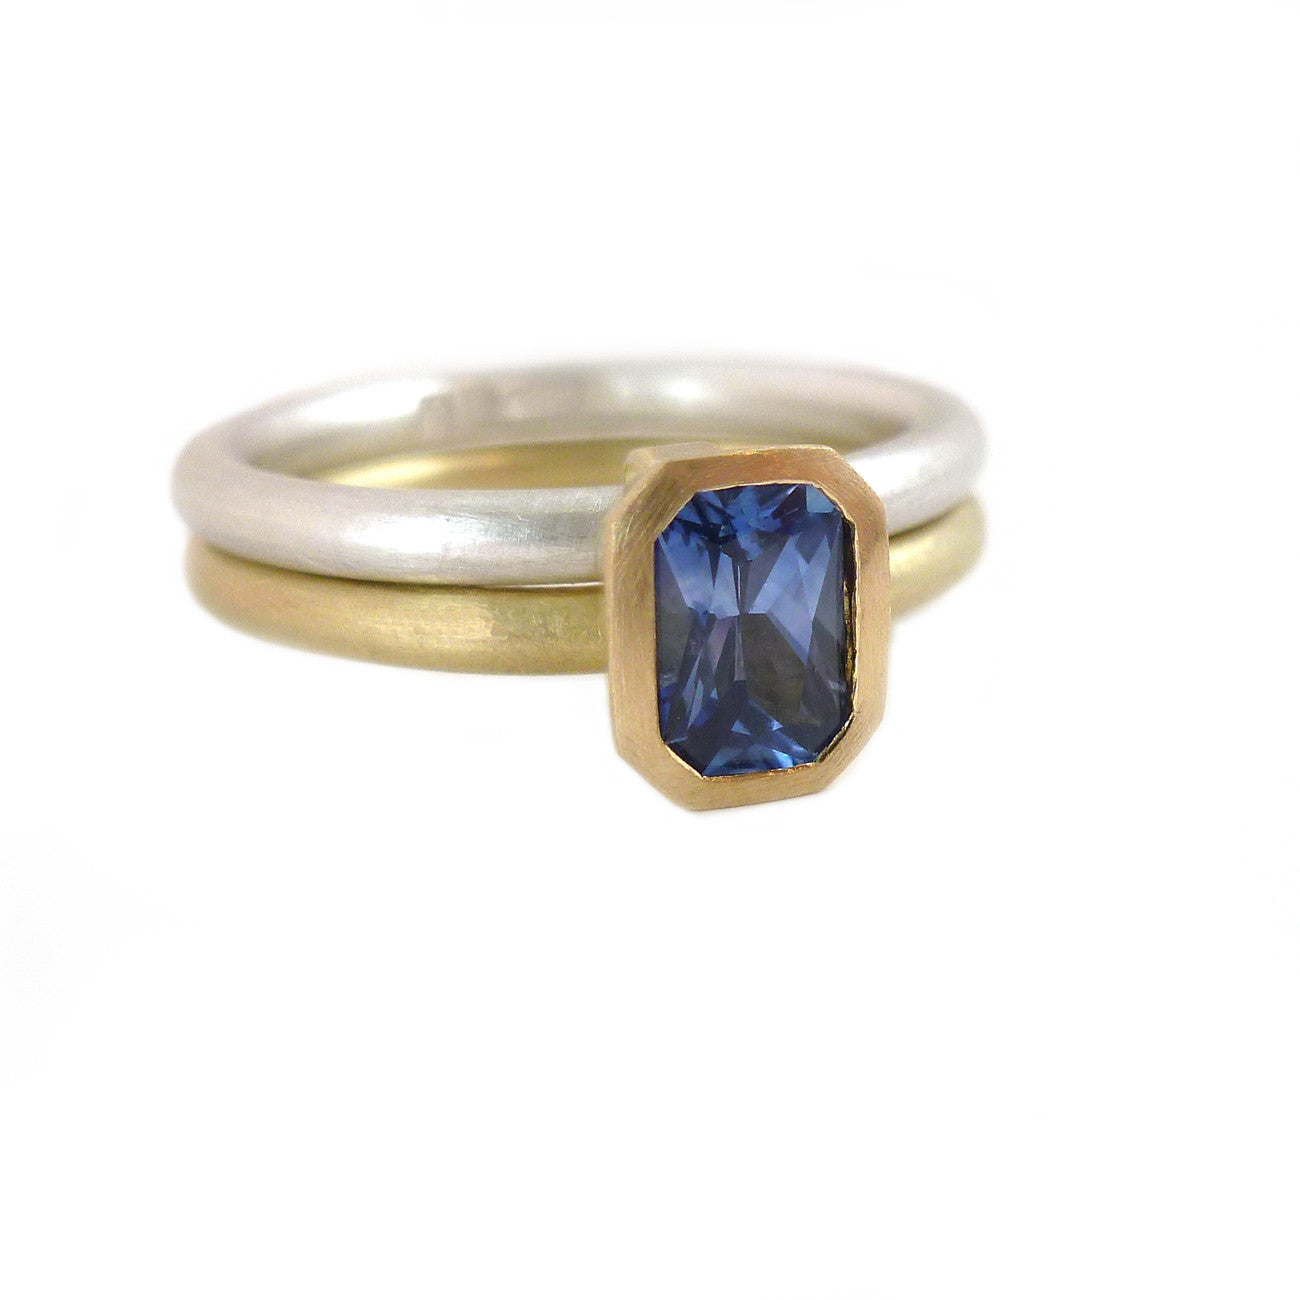 SOLD: 18k Gold and Sapphire Ring (OF13) - Sue Lane Contemporary Jewellery - 1